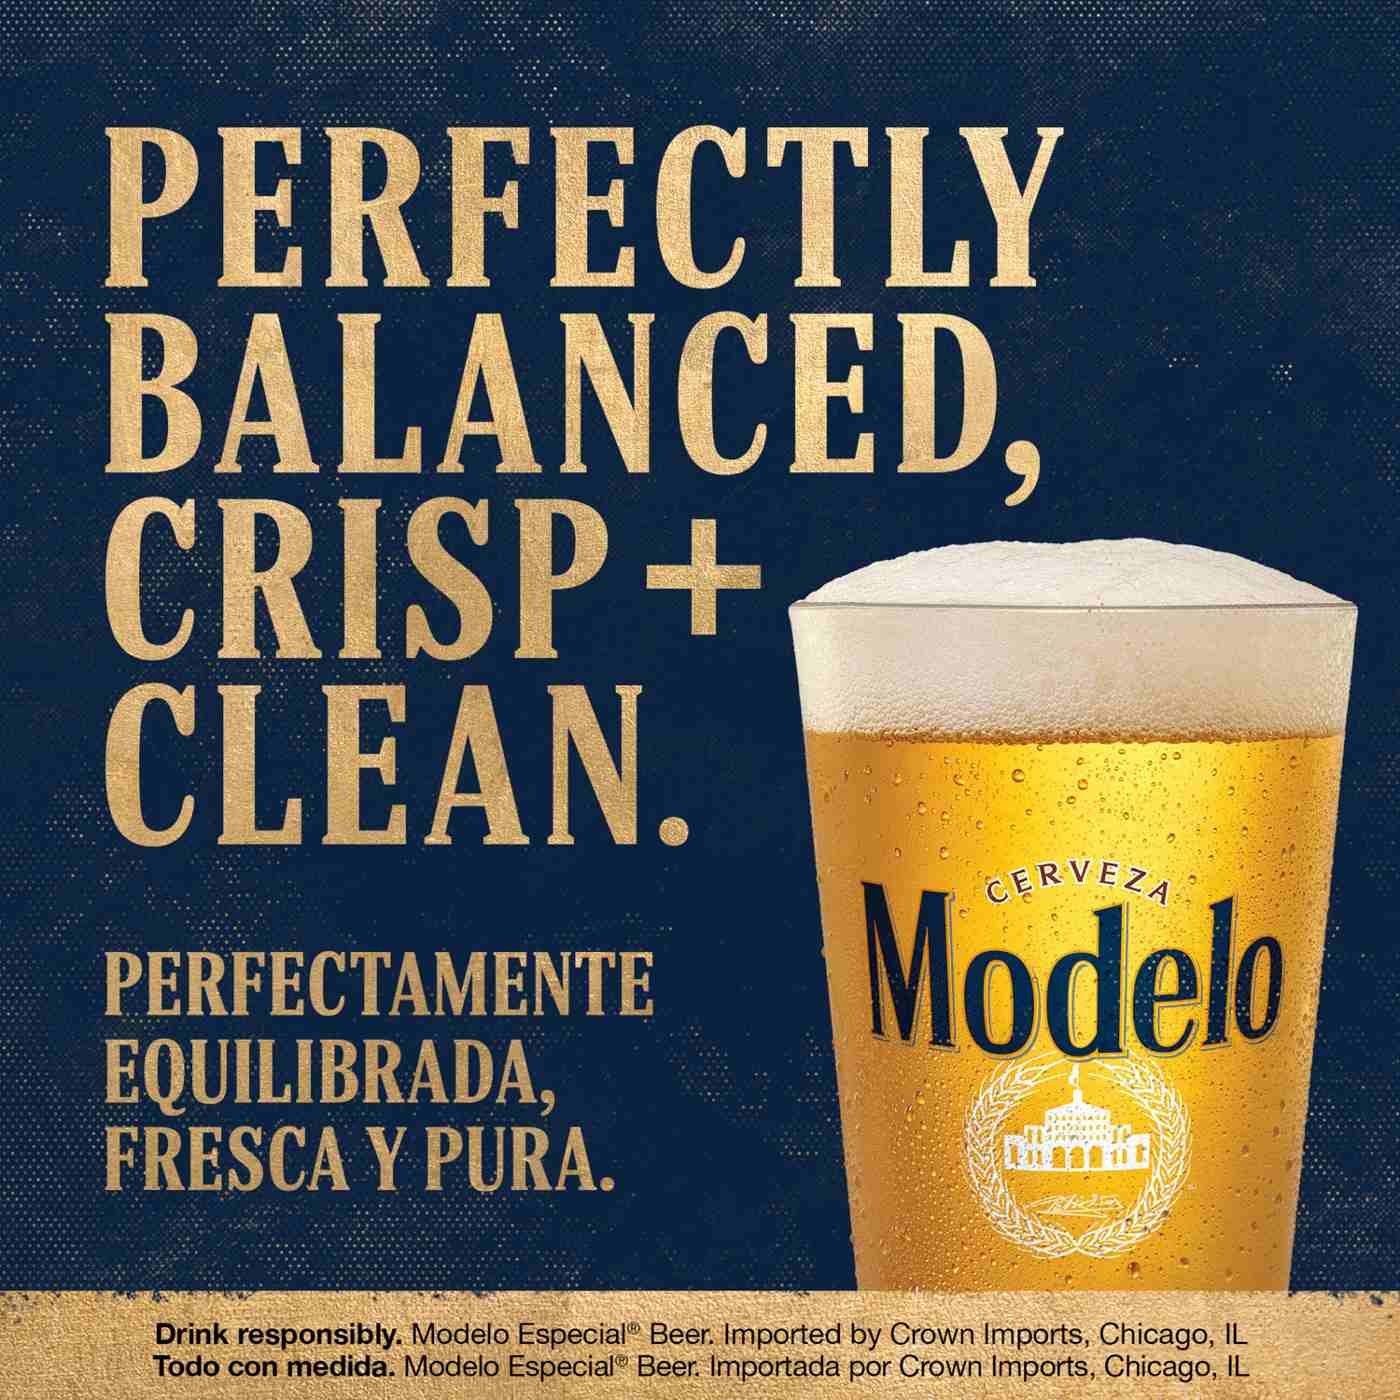 Modelo Especial Mexican Lager Import Beer 12 oz Bottles, 6 pk; image 5 of 10